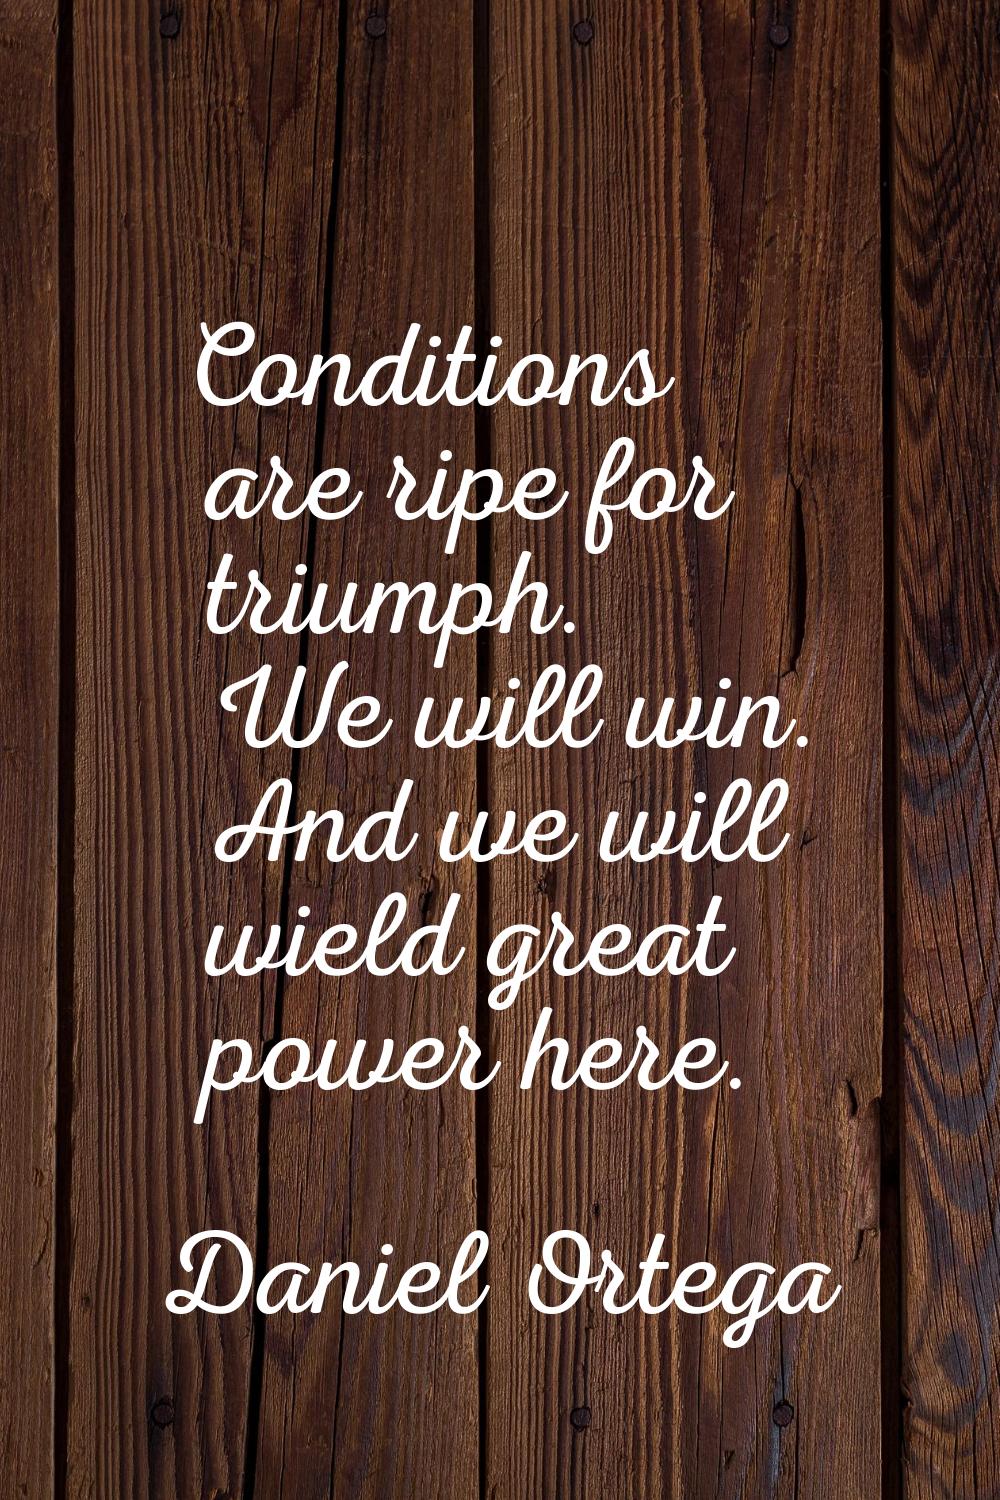 Conditions are ripe for triumph. We will win. And we will wield great power here.